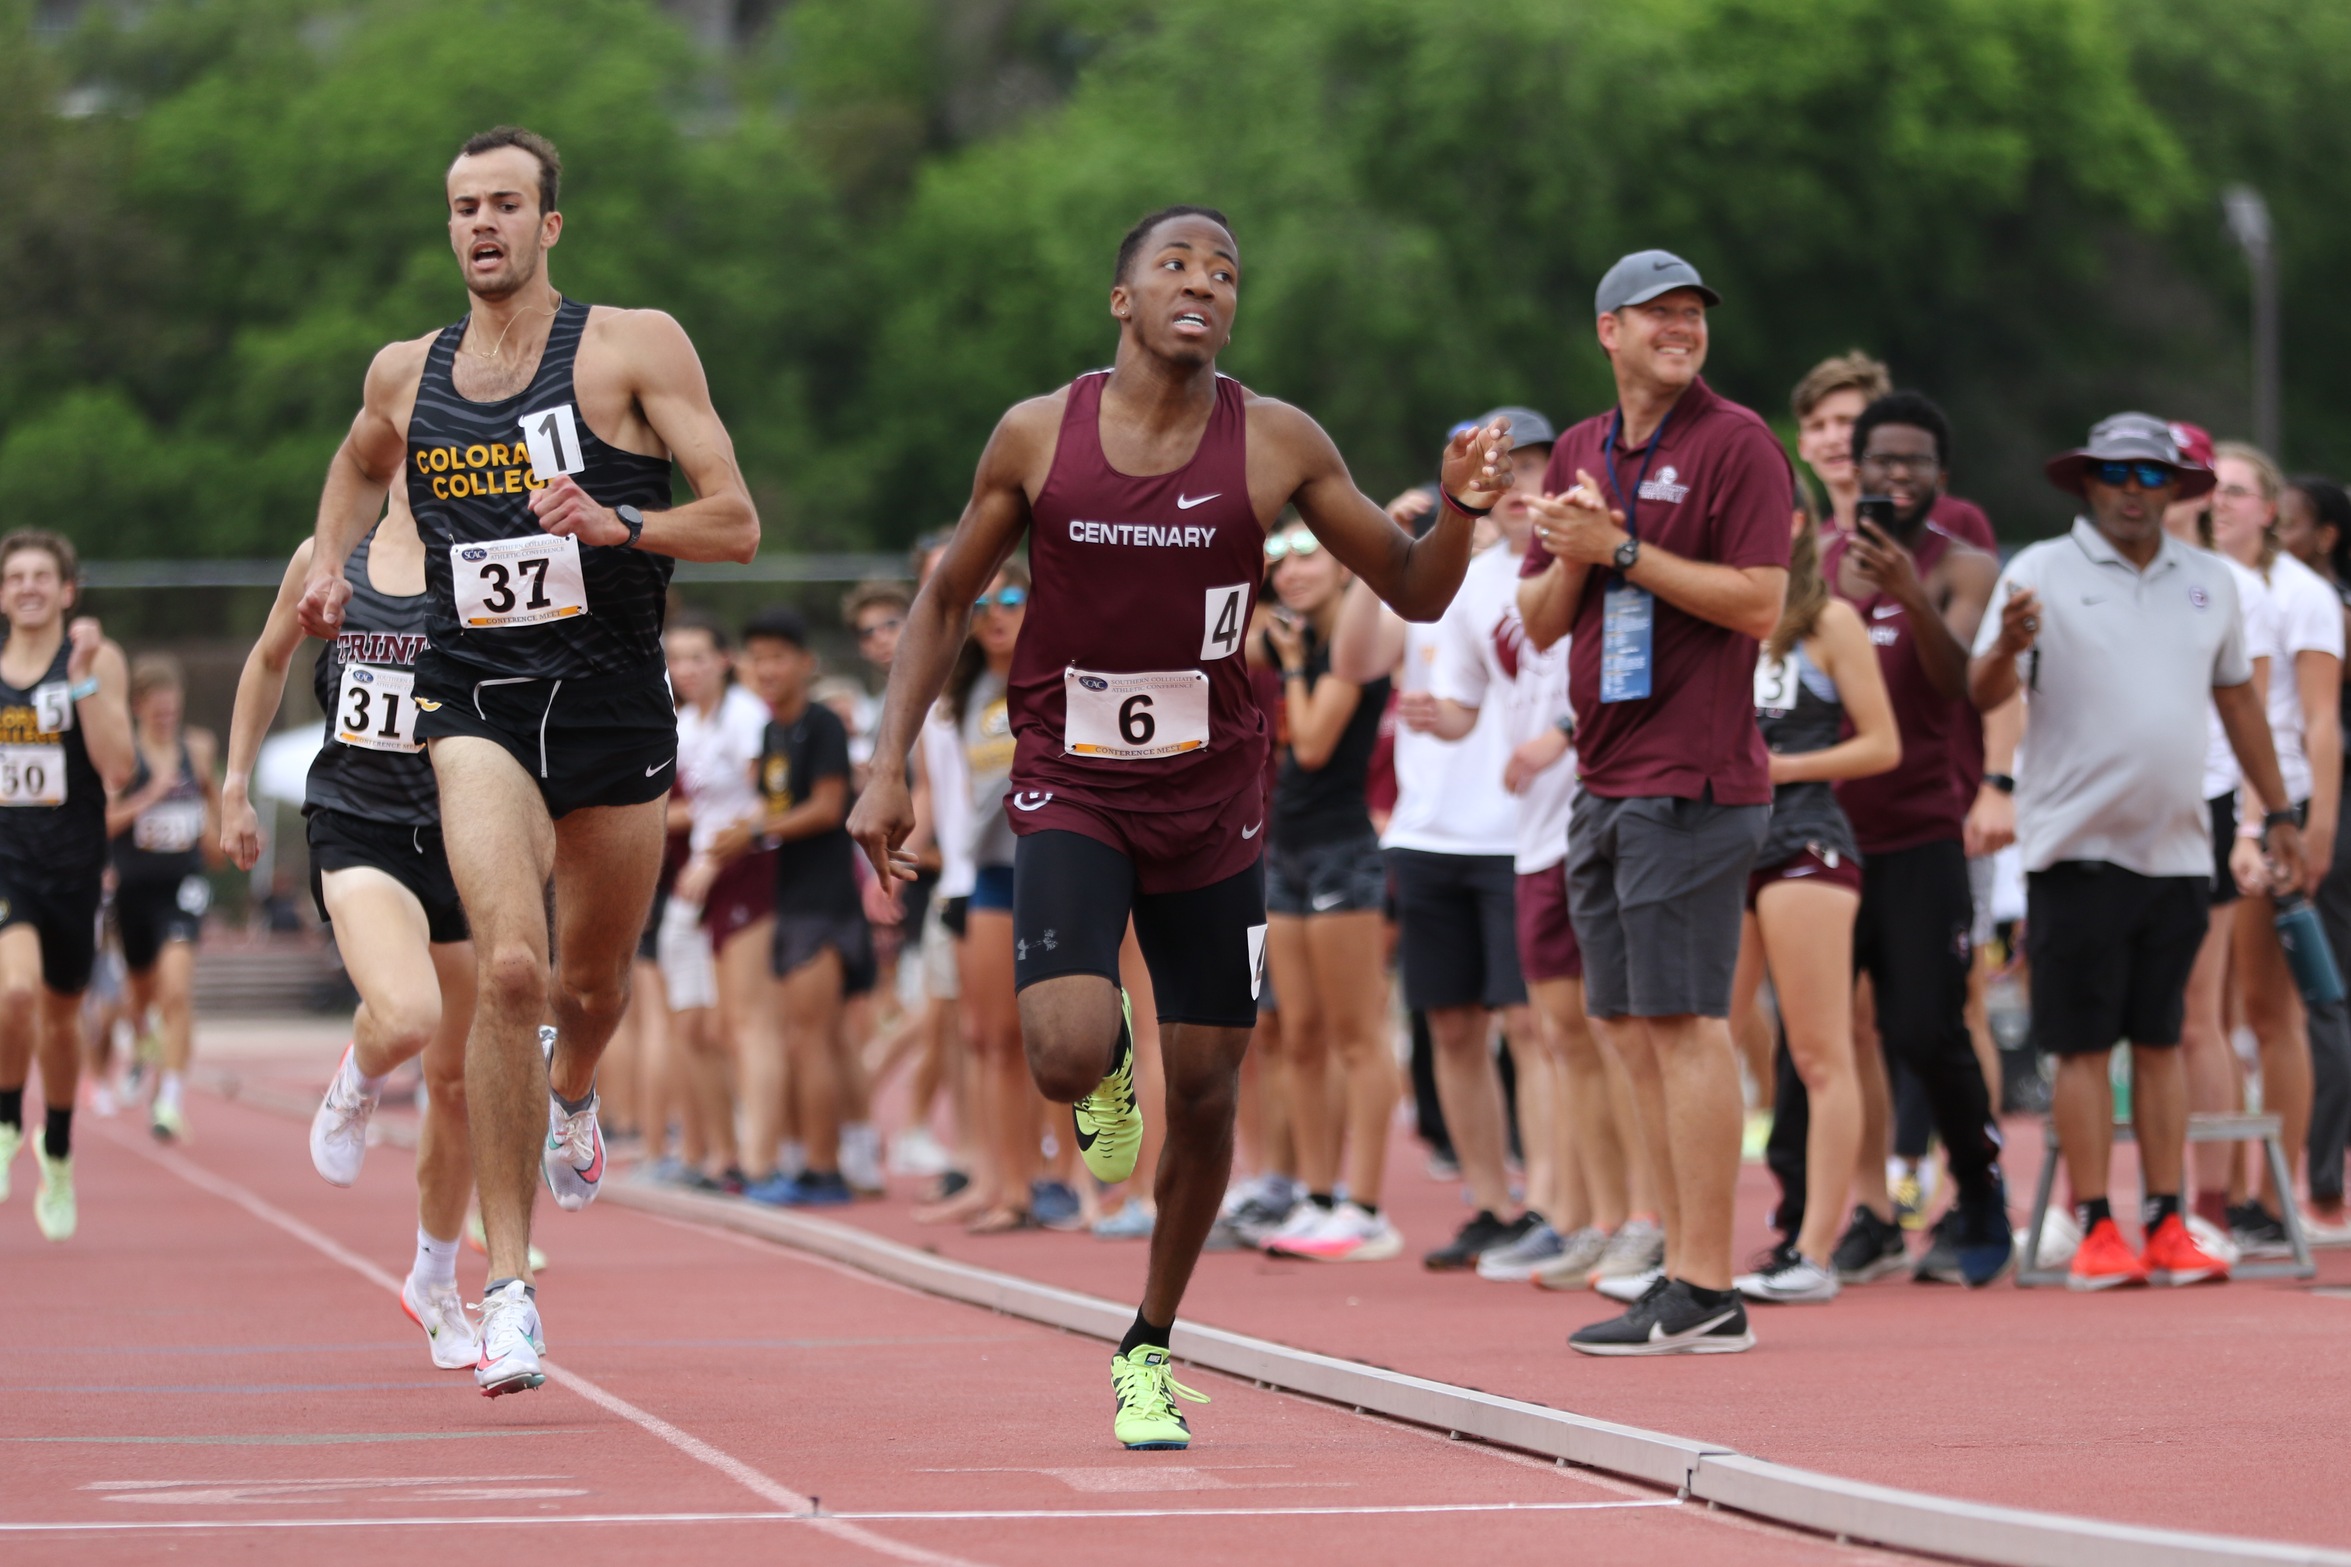 Sophomore Devante' Jack aims to qualify for the upcoming NCAA Championships in the 800 meters on Friday.